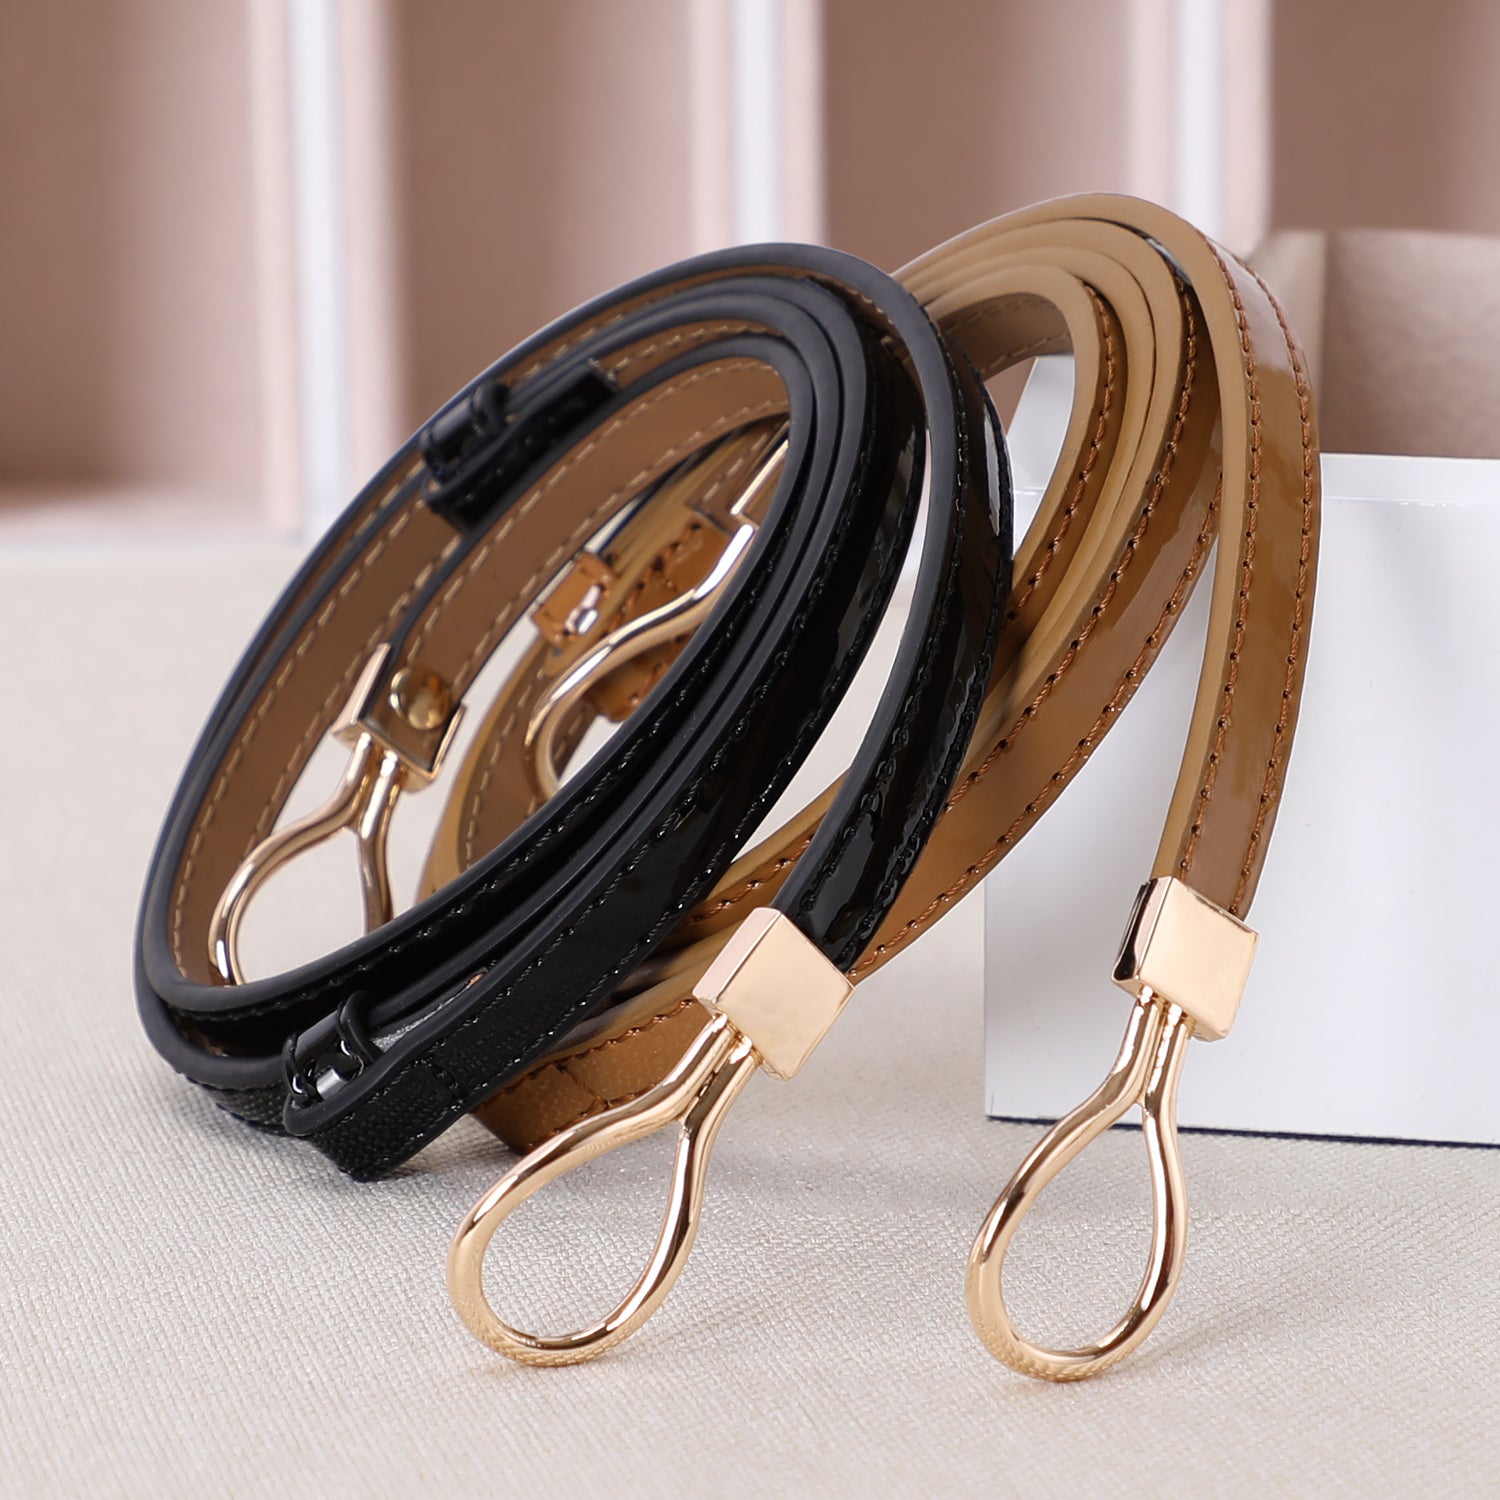 Women' Business Infinity Smart Belt - Black Leather NORA GARDNER | OFFICIAL STORE for work and office